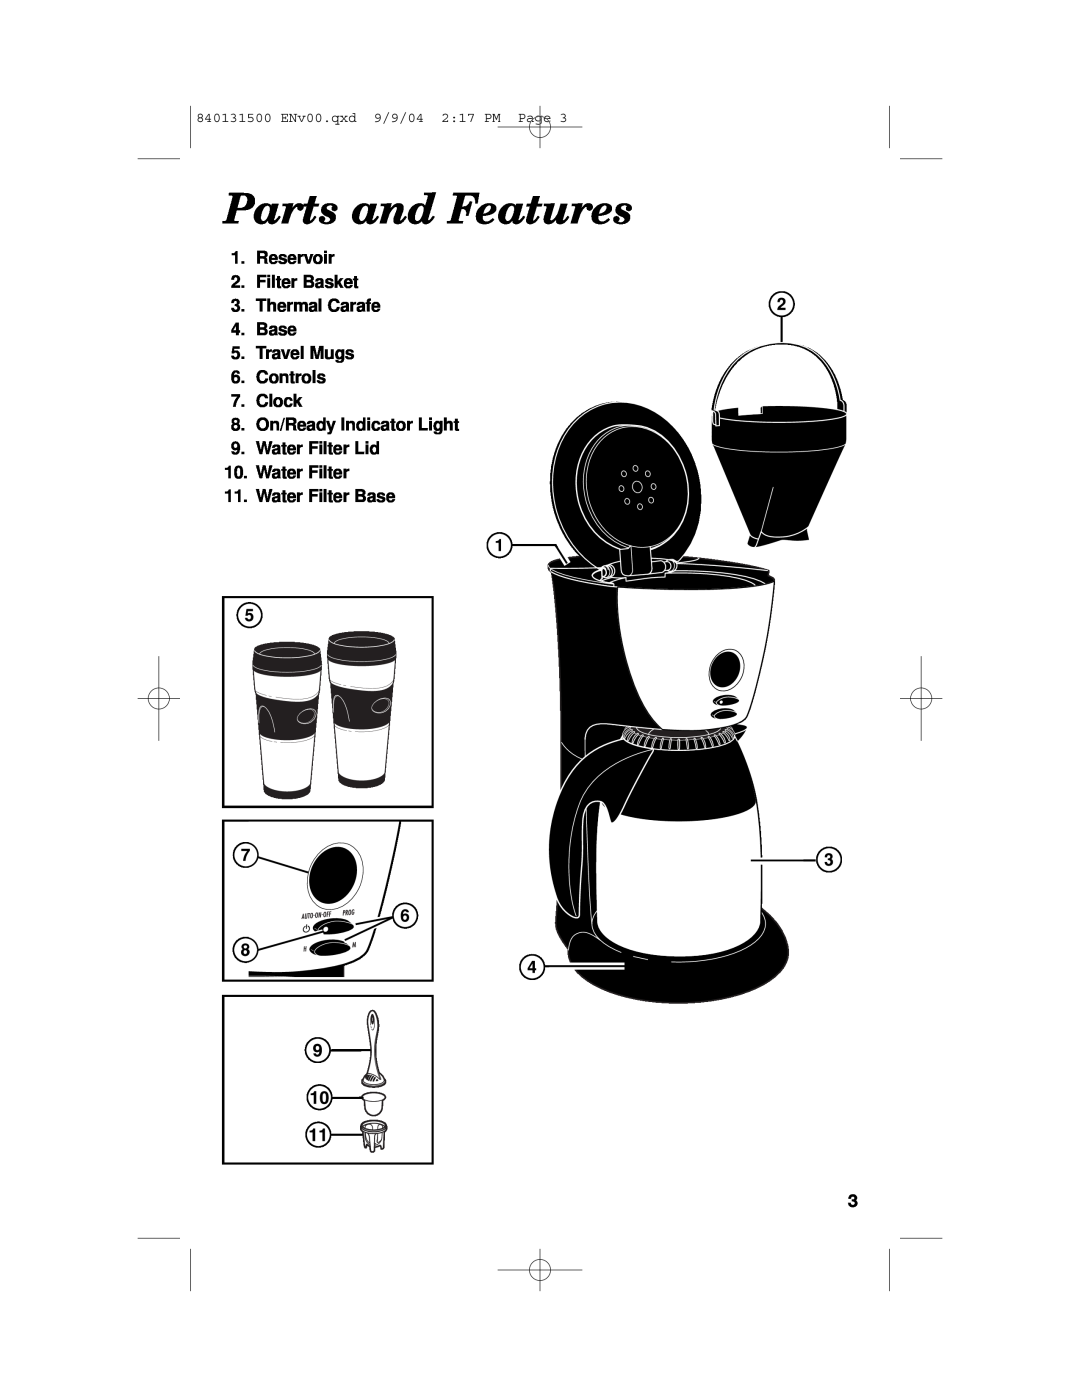 Hamilton Beach 45114 Parts and Features, Reservoir 2.Filter Basket 3.Thermal Carafe, Base 5.Travel Mugs 6.Controls 7.Clock 